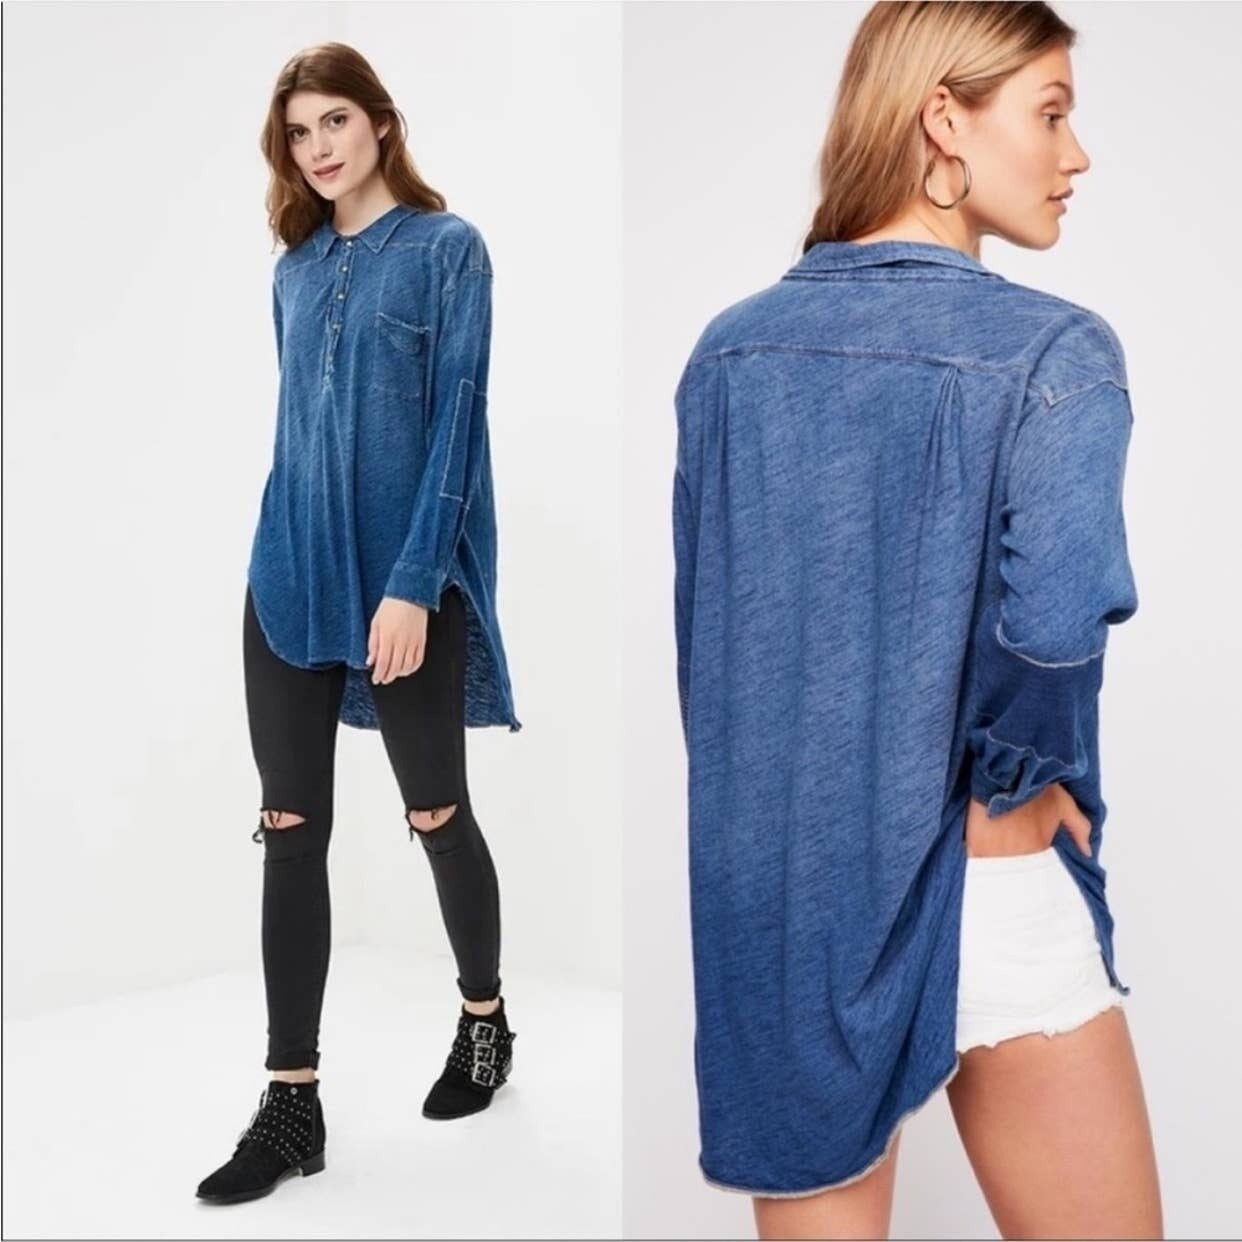 Free People We the Free Love This Henley Chambray Tunic